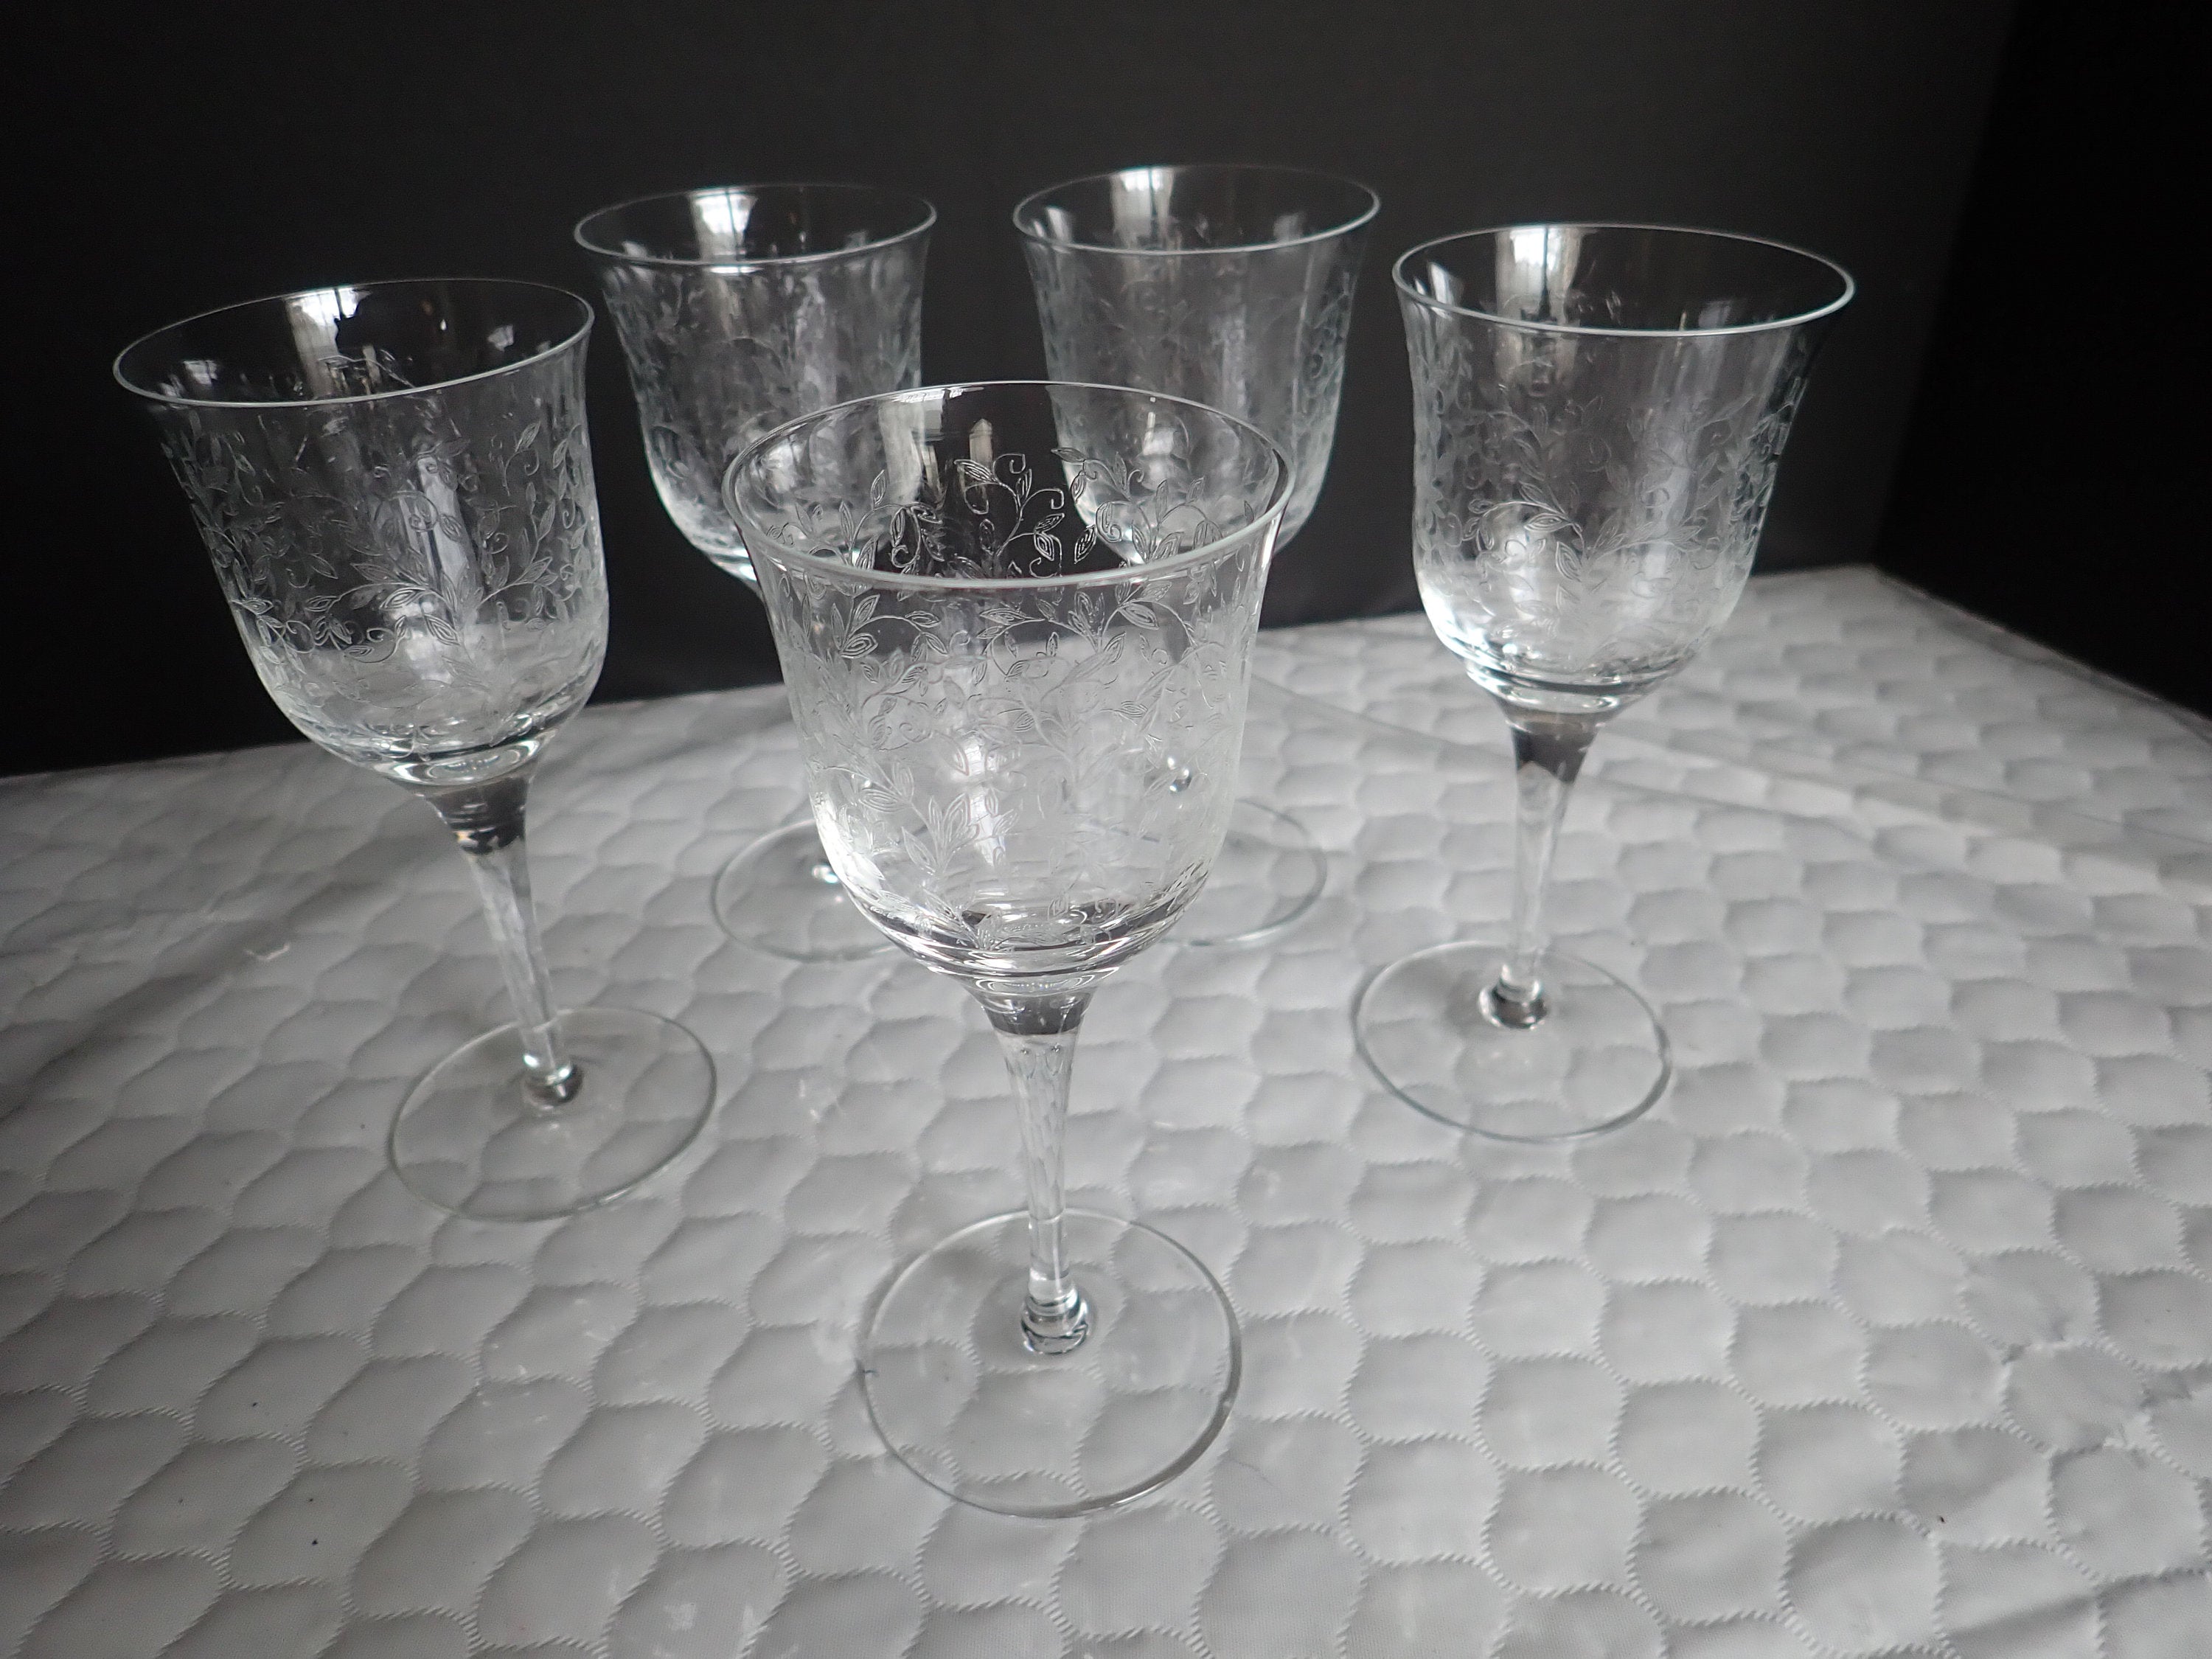 SET of 6 Cut Glass Cocktail Glasses, Berries, Stems, Leaves, 5 1/2 Tall, 2  7/8 Diameter, 3 Ounces 